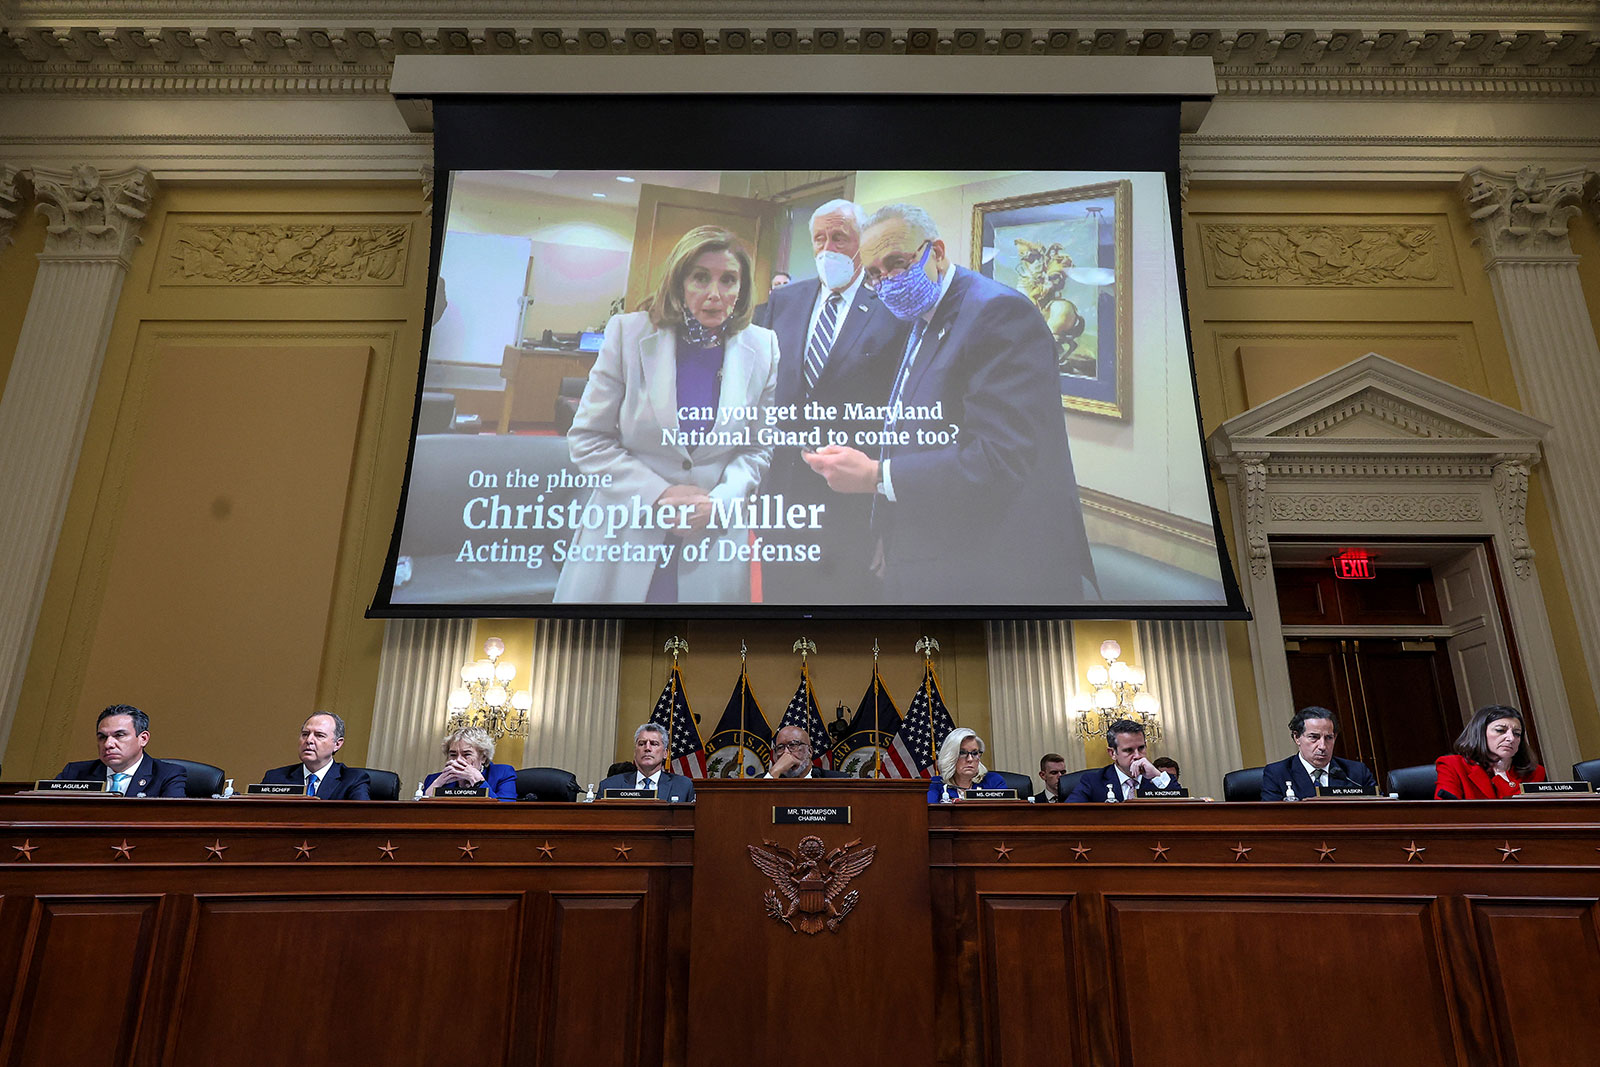 A video showing House Speaker Nancy Pelosi, Senate Majority Leader Chuck Schumer and House Majority Leader Steny Hoyer is shown during a House select committee hearing on October 13. 